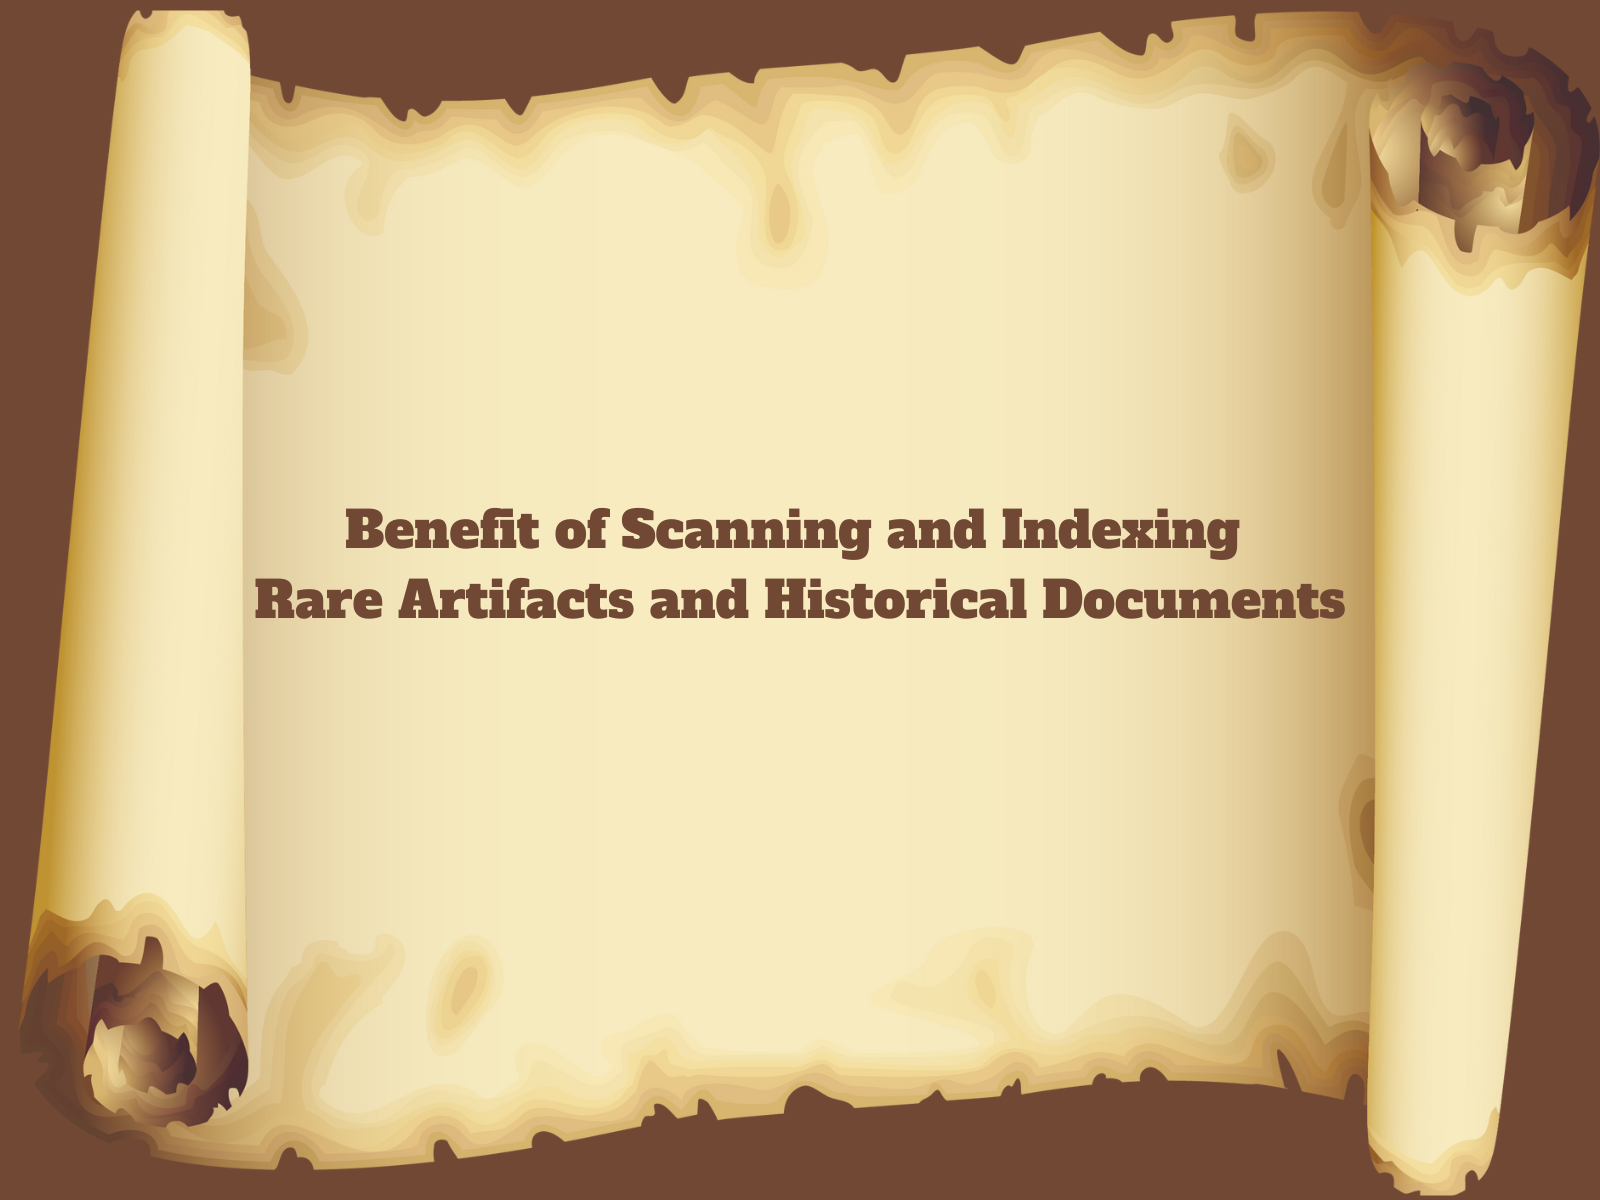 Benefit of Scanning and Indexing Rare Artifacts and Historical Documents